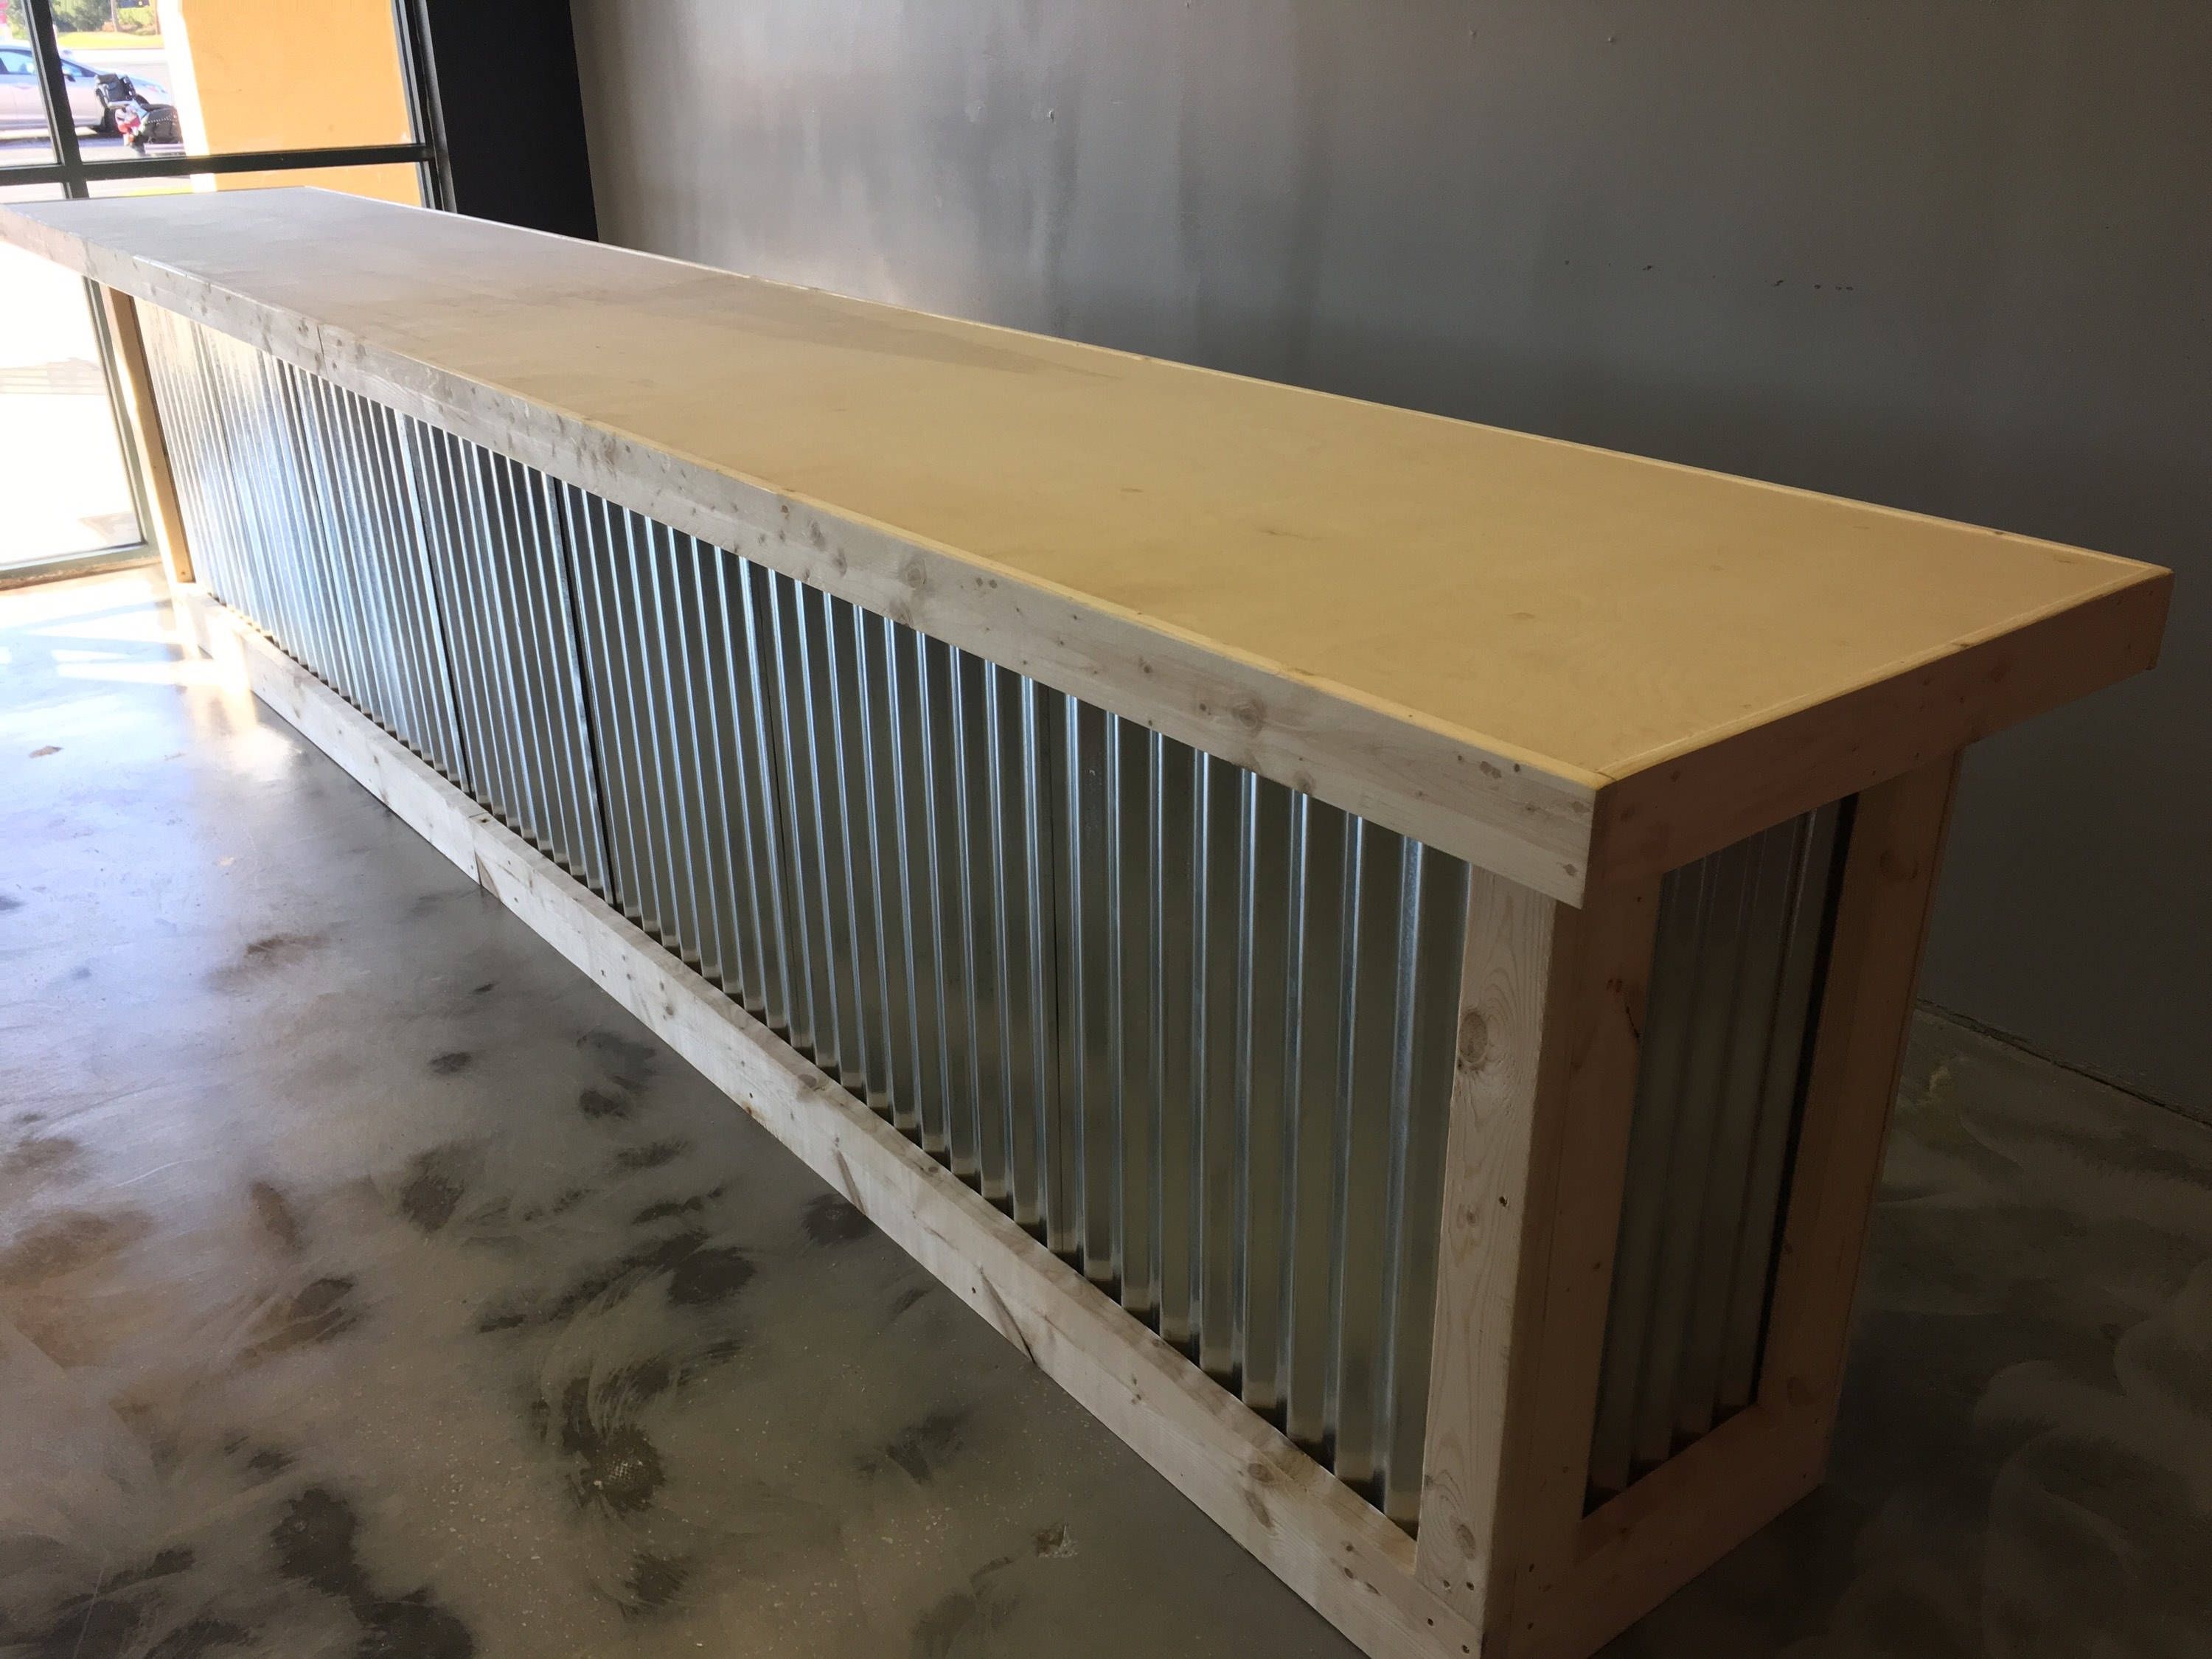 The Vapor – 16' Corrugated Metal Rustic Or Industrial Sales Counter Within Corrugated Metal Sideboards (View 15 of 30)